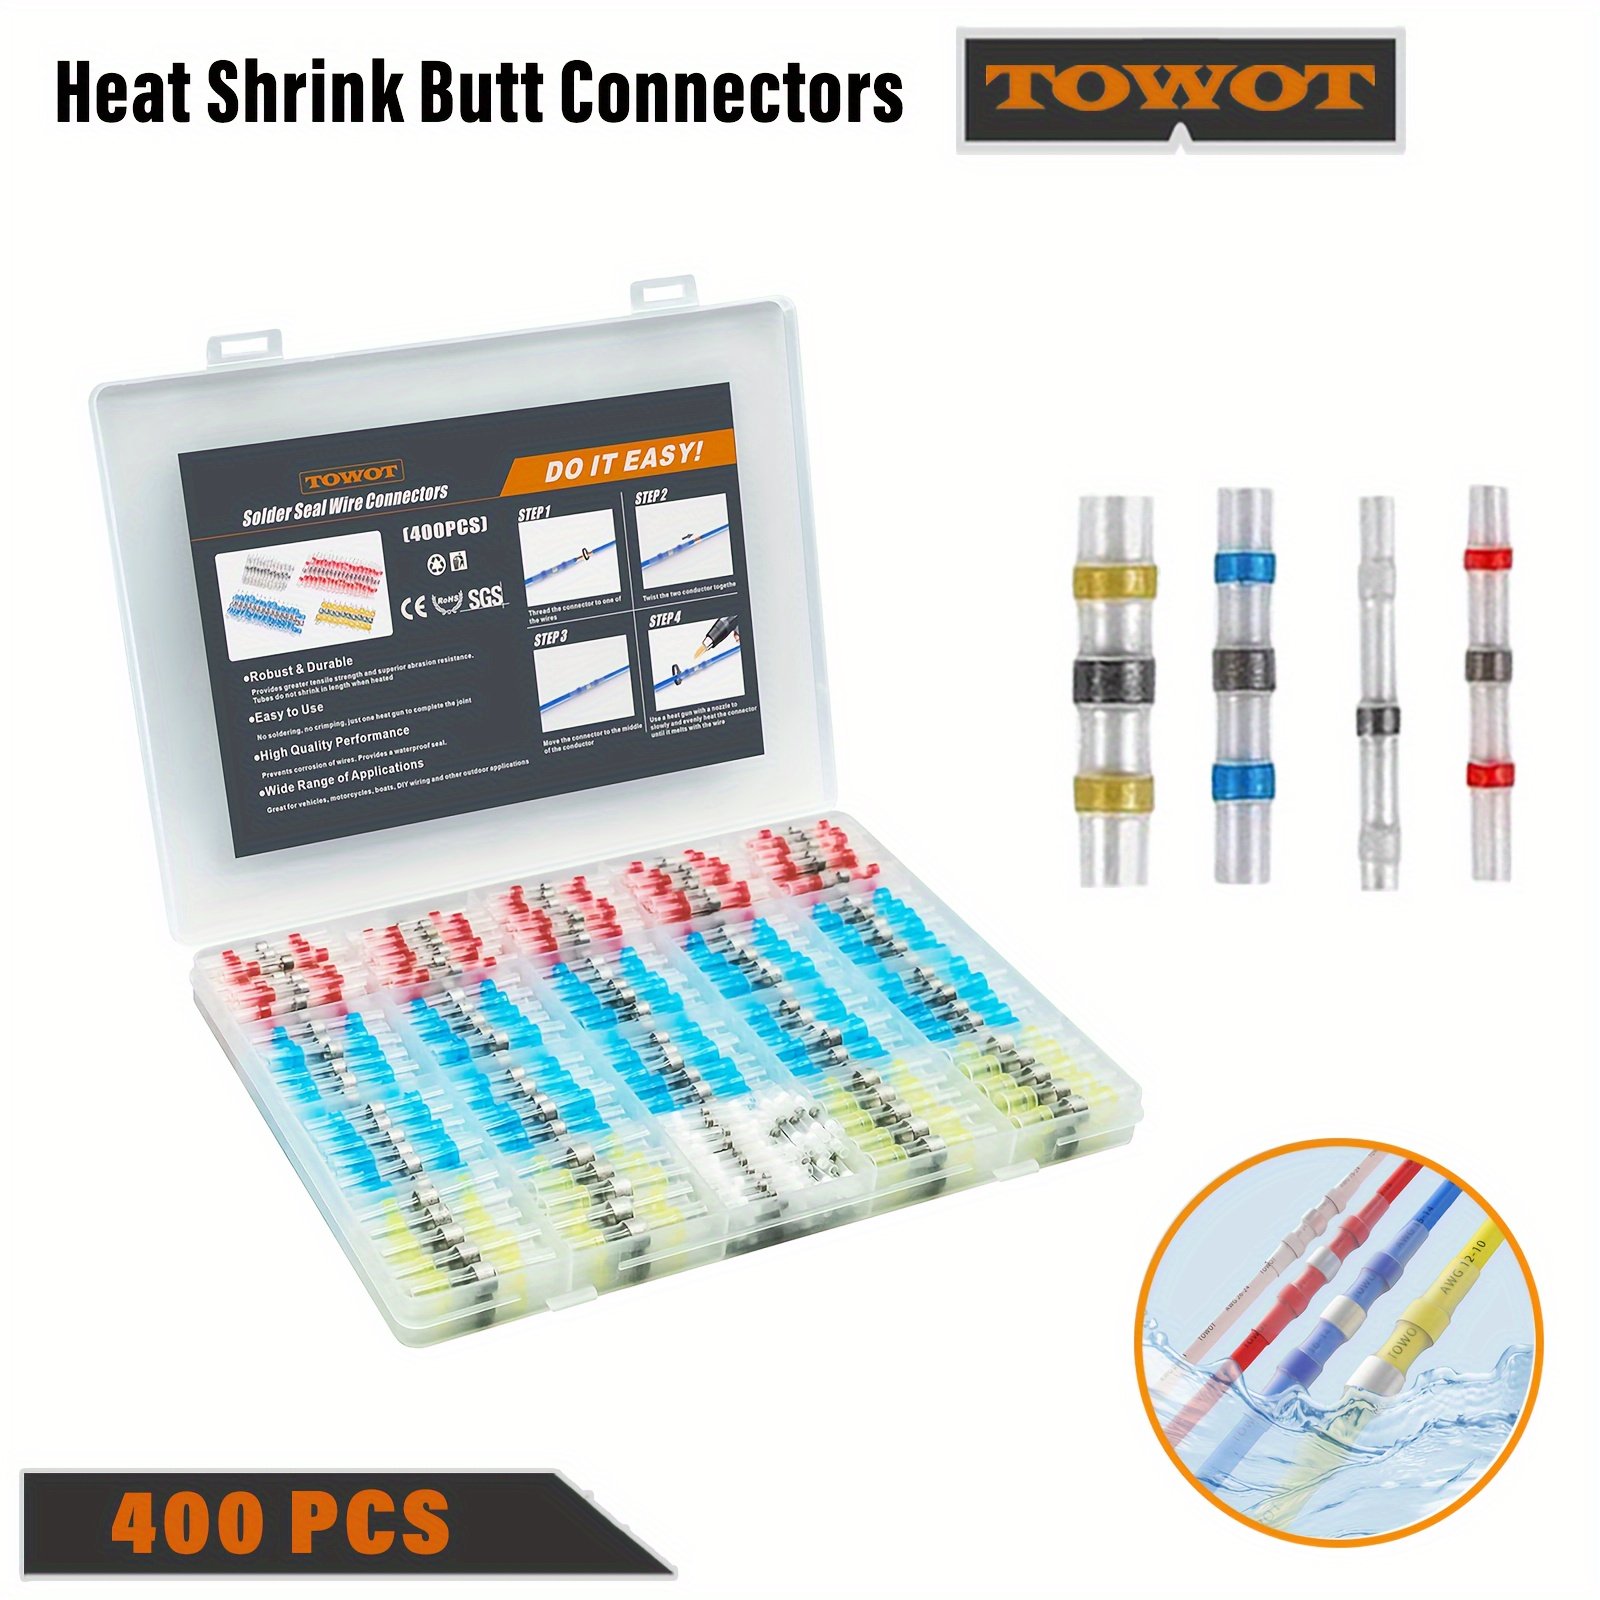 

300pcs Heat Shrink Butt Connectors, Solder Seal Wire Connectors, Waterproof, Insulated, And Corrosion-resistant Electrical Wire Terminals For Truck, Marine, Automotive, And Joints